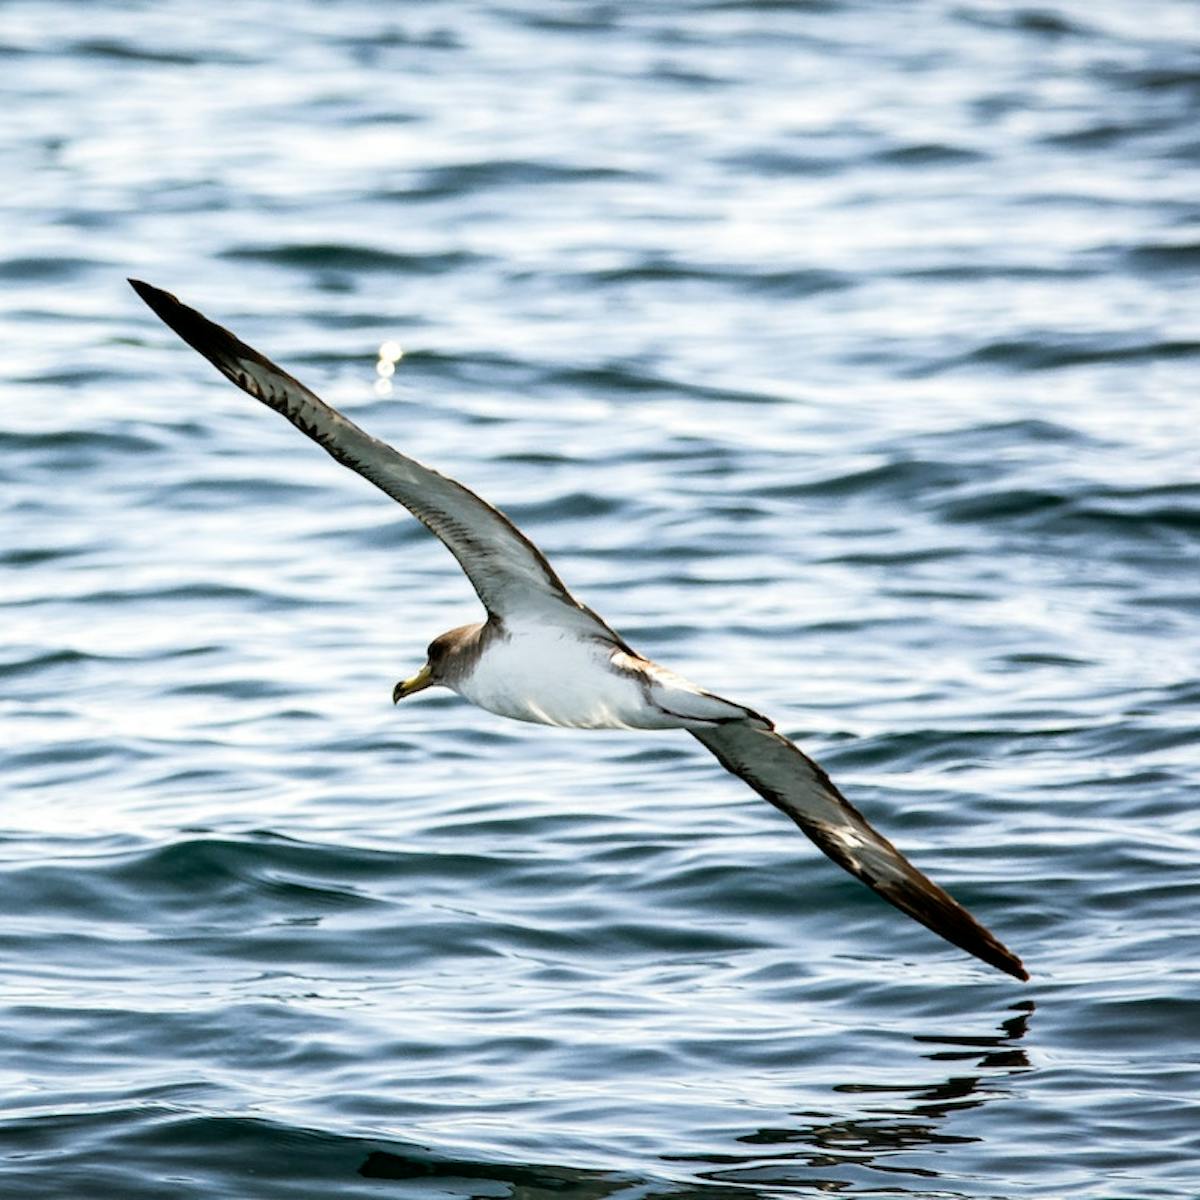 a Cory's Shearwater flying above the water surface